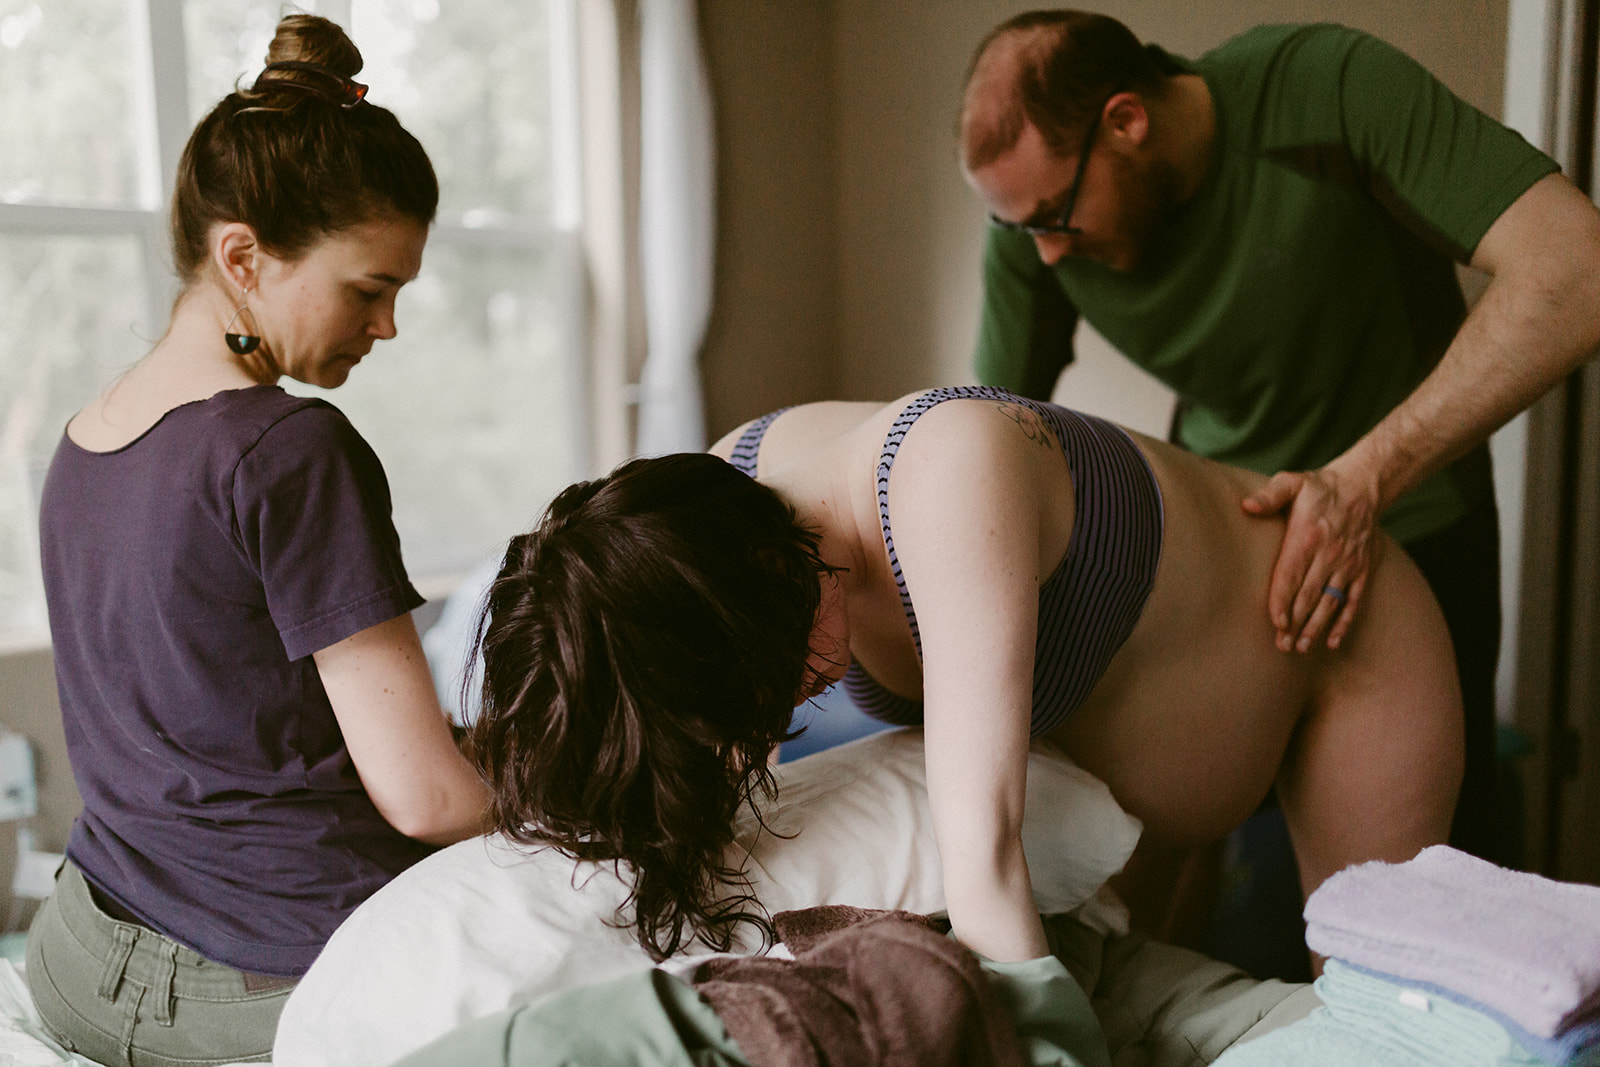 Midwife and partner provide support during a home birth.